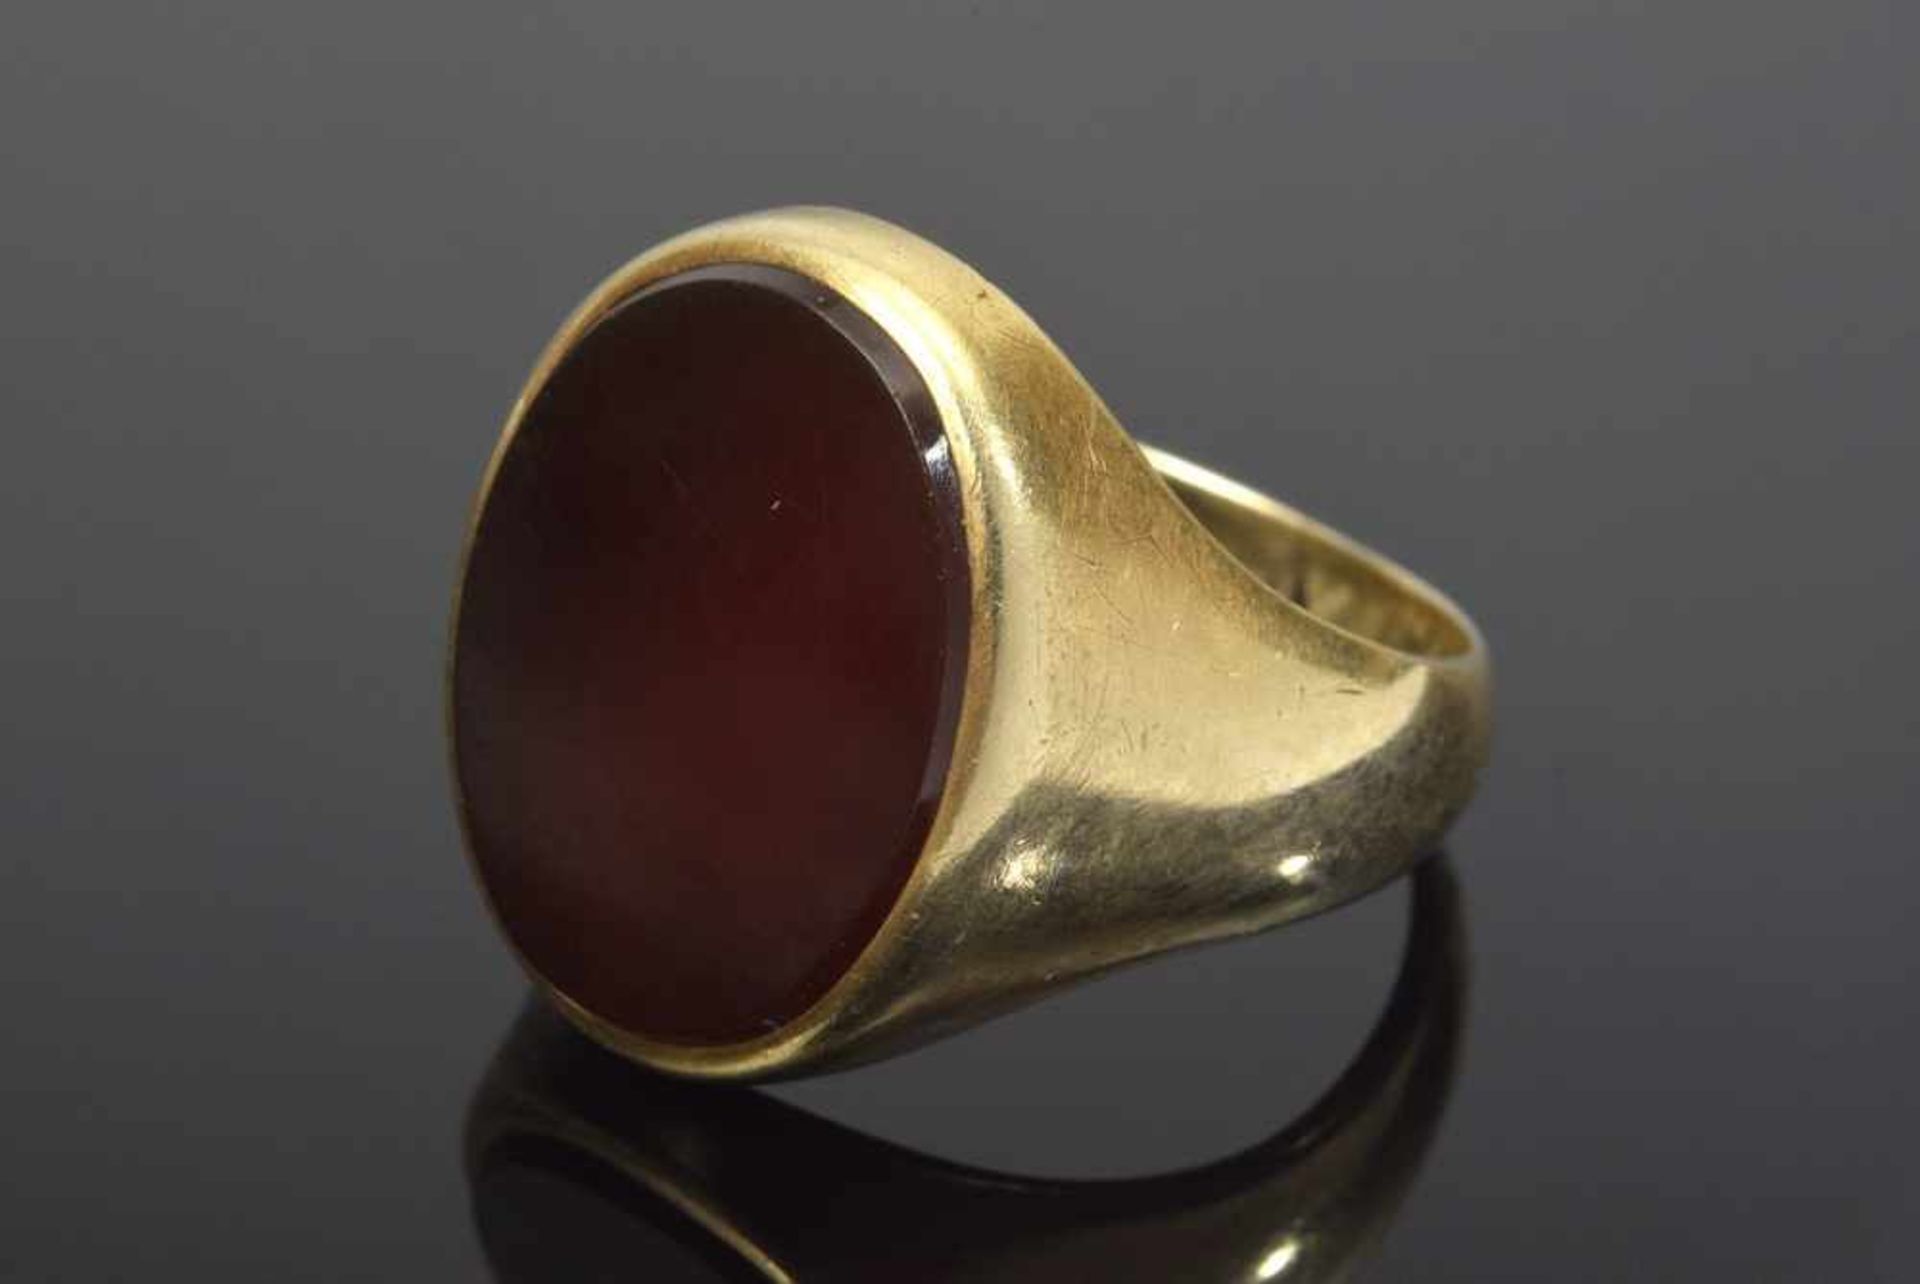 GG 585 Siegelring mit Karneol, 6,3g, Gr. 61,5 YG 585 Signet ring with carnelian, 6,3g, size 61,5 - Image 2 of 2